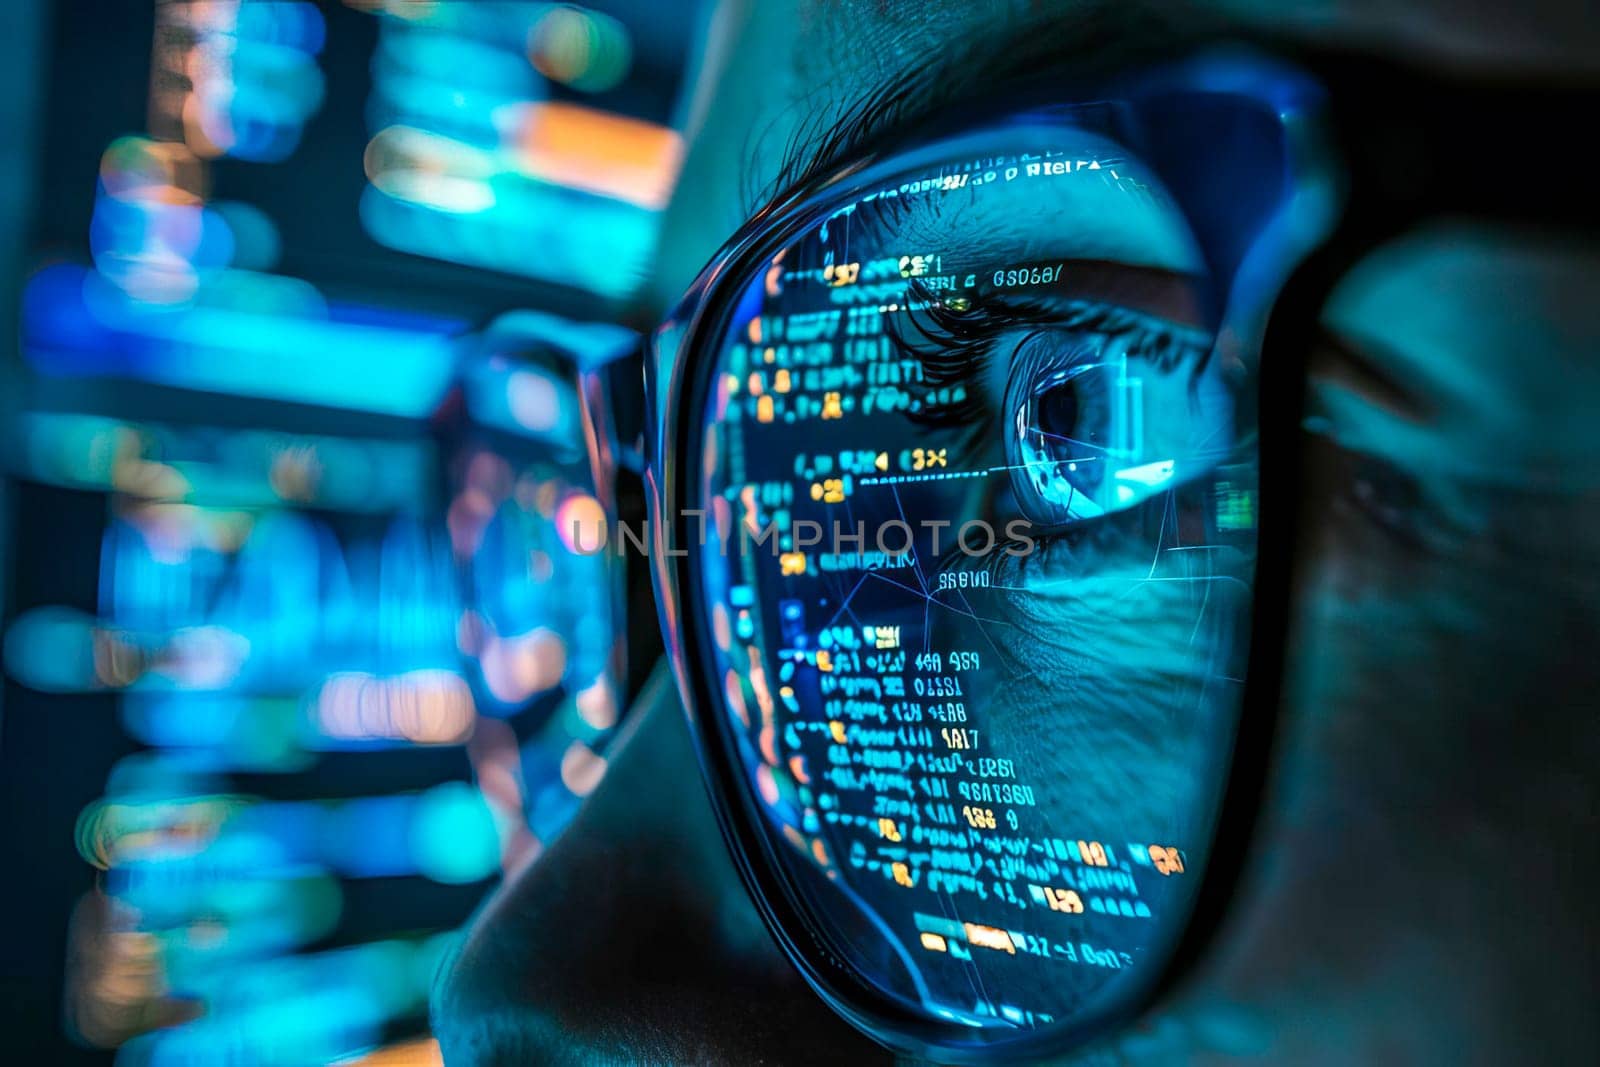 Detailed view of a human eye with glasses, in front of a computer monitor displaying digital information. by vladimka